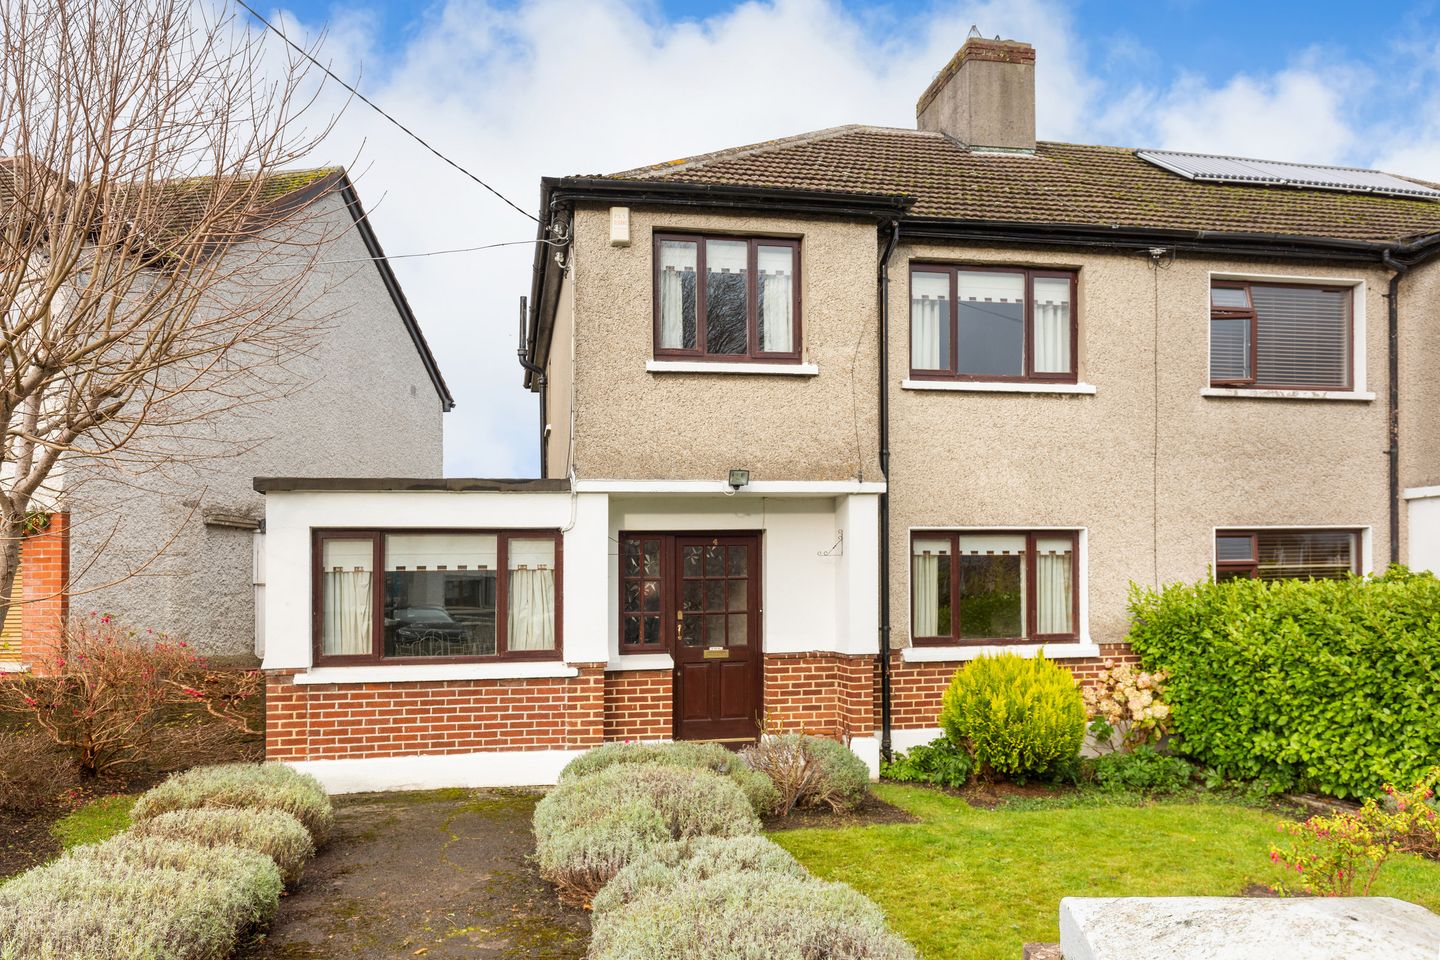 4 Orchardstown Drive, Templeogue, Templeogue, Dublin 14, D14YR80